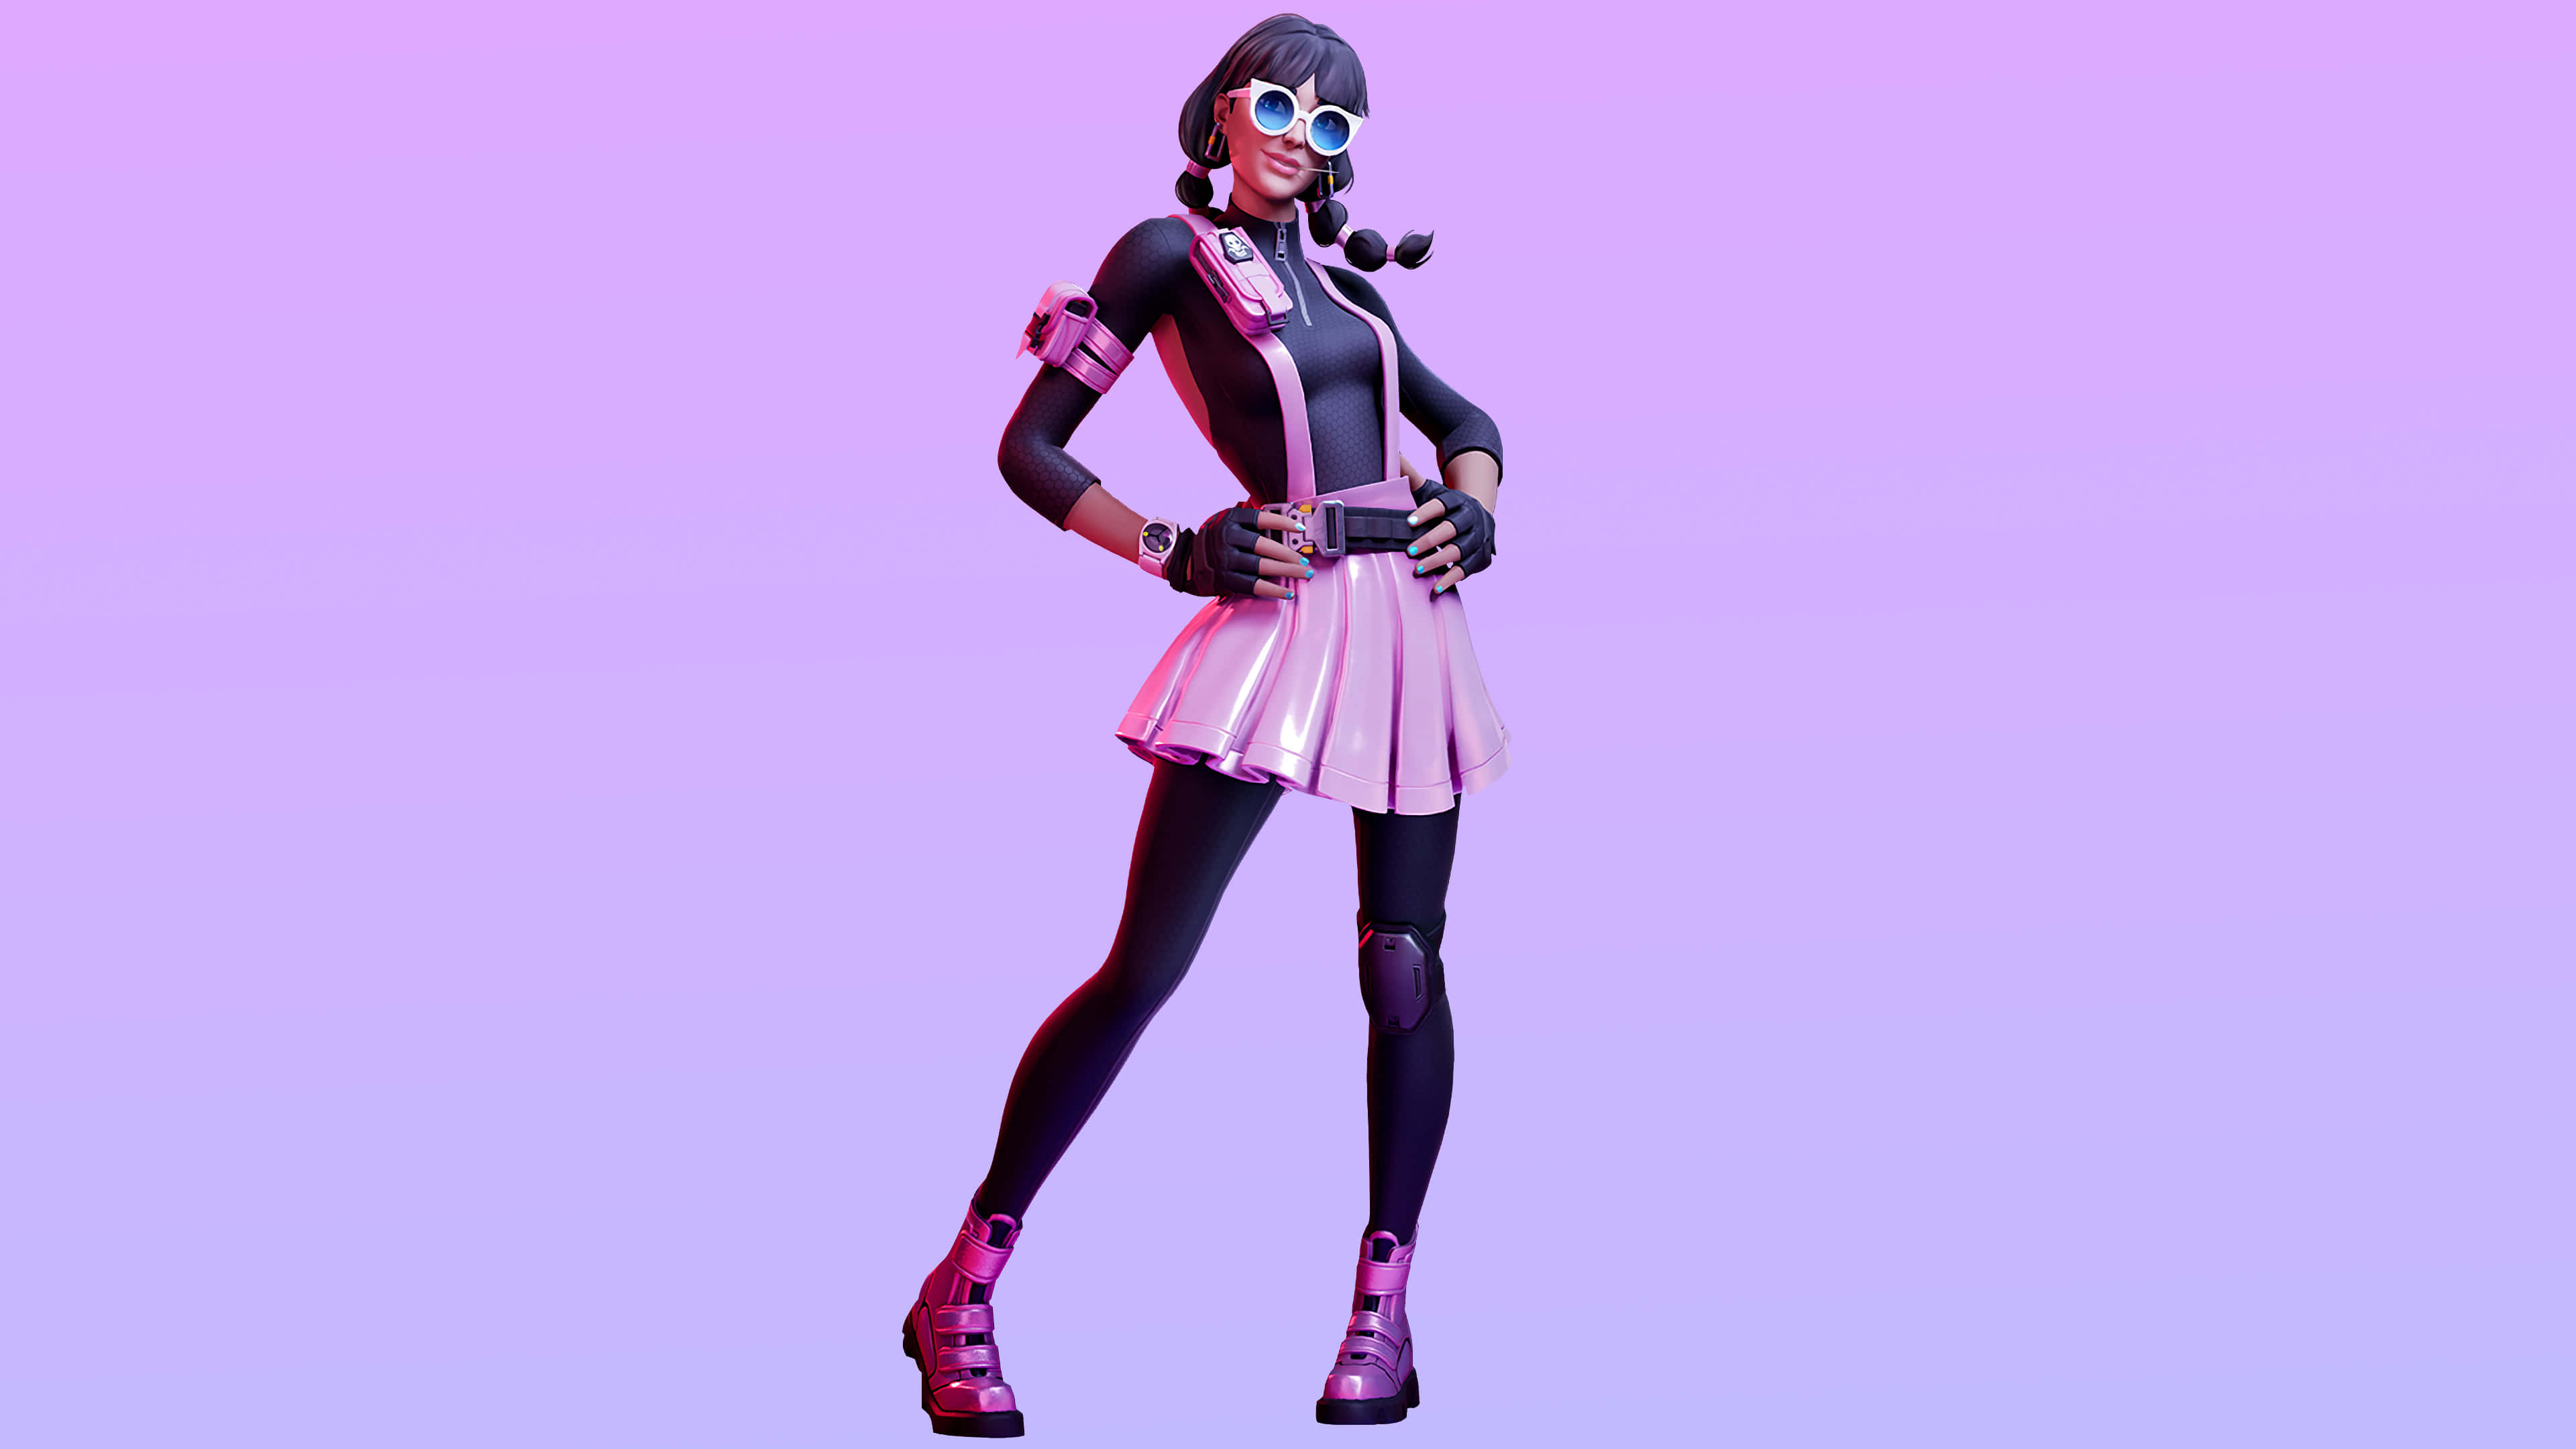 fortnite standout style set cameo vs chic variant 2 skin outfit uhd 4k wallpaper